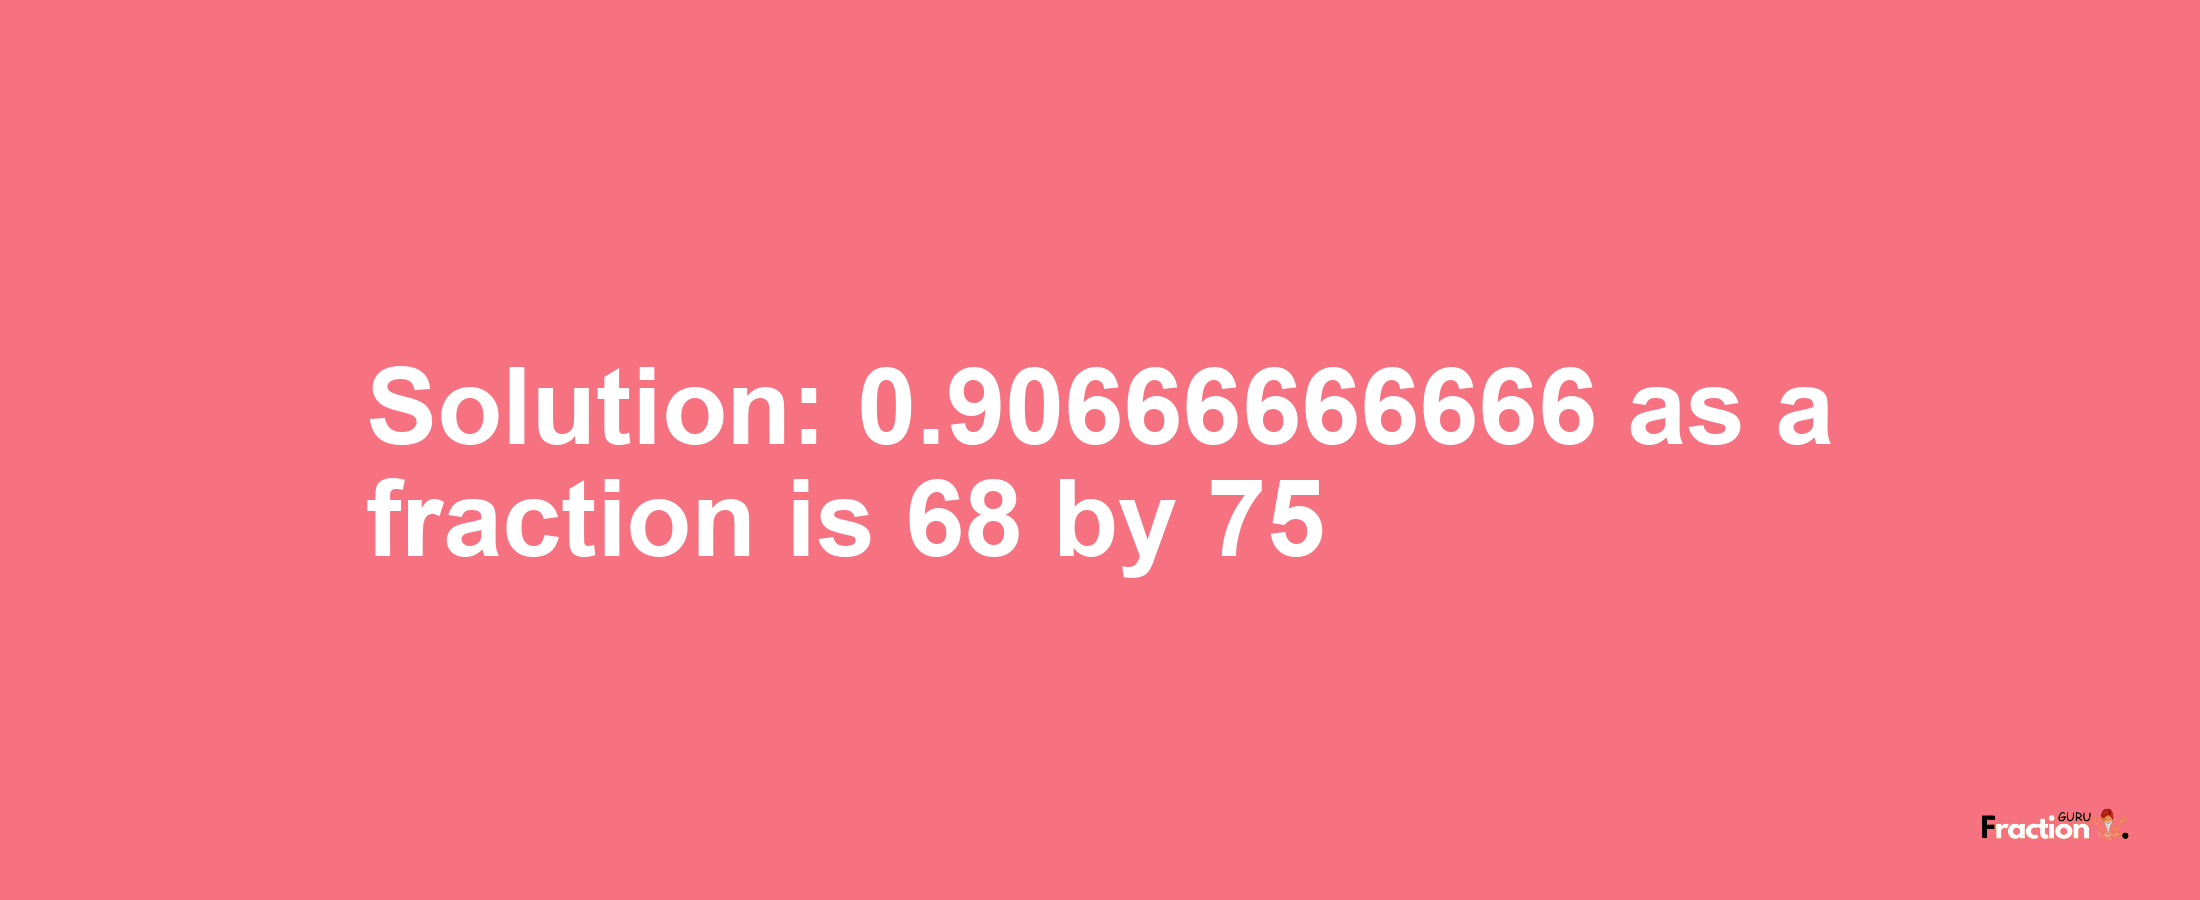 Solution:0.90666666666 as a fraction is 68/75